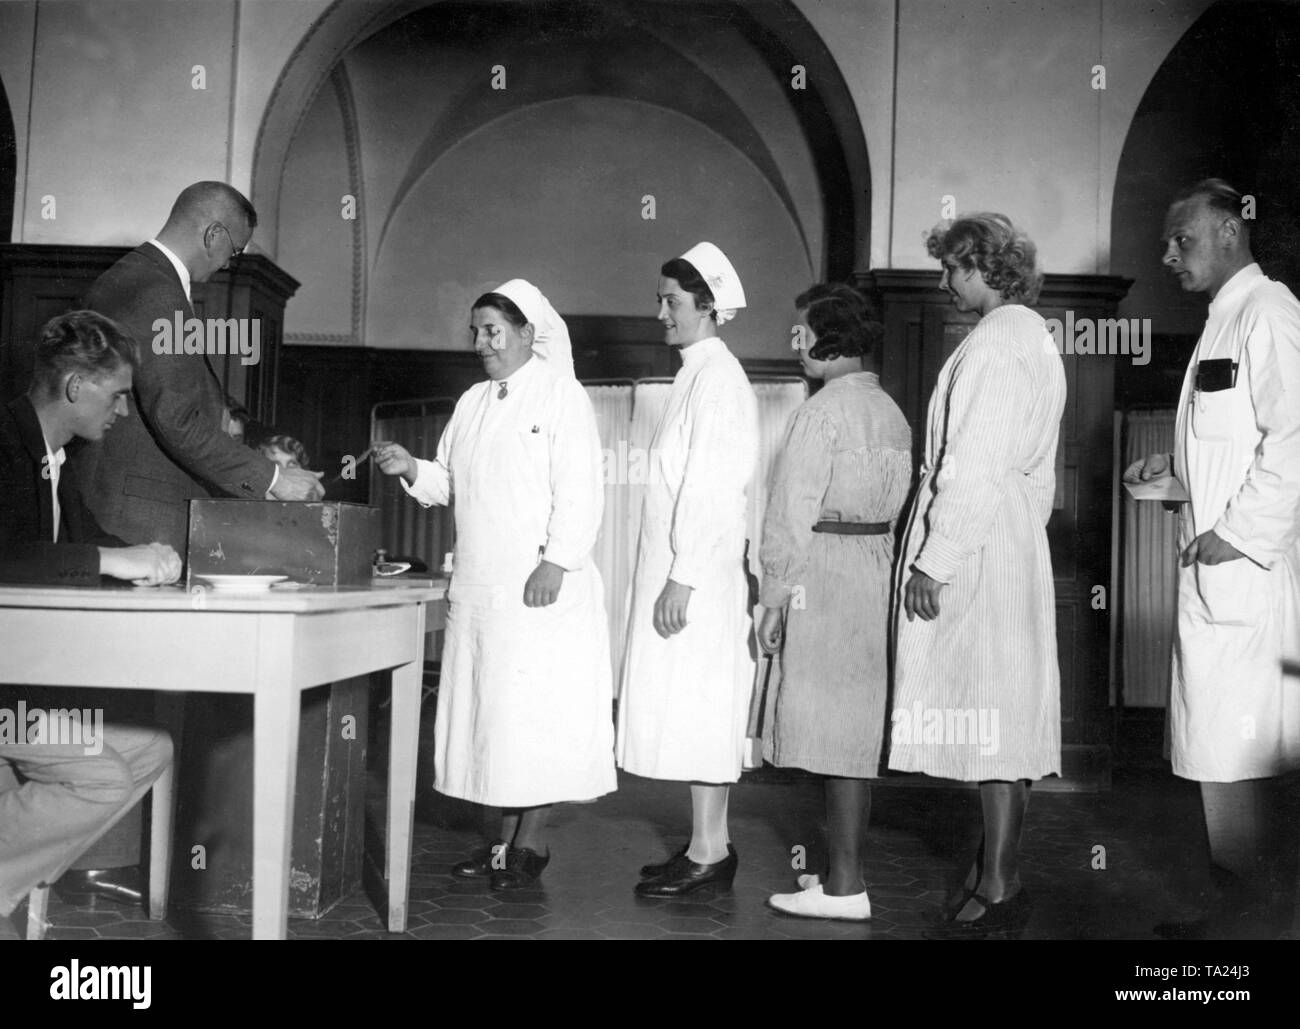 Physicians, nurses and patients are voting at a hospital during the Reichstag elections in 1932. Stock Photo